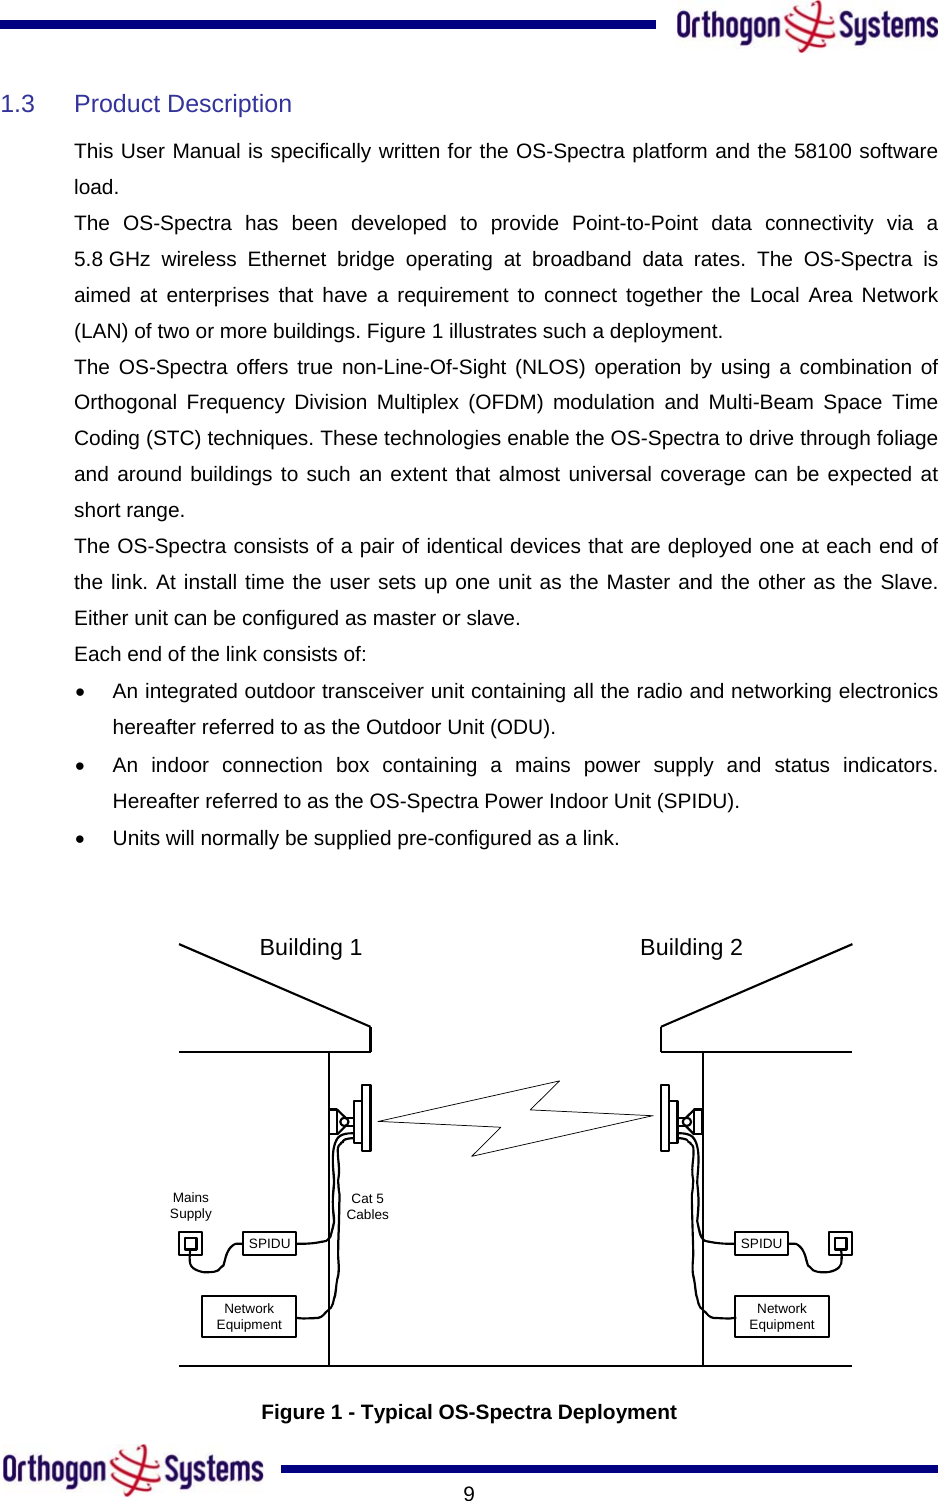       91.3 Product Description This User Manual is specifically written for the OS-Spectra platform and the 58100 software load. The OS-Spectra has been developed to provide Point-to-Point data connectivity via a 5.8 GHz wireless Ethernet bridge operating at broadband data rates. The OS-Spectra is aimed at enterprises that have a requirement to connect together the Local Area Network (LAN) of two or more buildings. Figure 1 illustrates such a deployment.  The OS-Spectra offers true non-Line-Of-Sight (NLOS) operation by using a combination of Orthogonal Frequency Division Multiplex (OFDM) modulation and Multi-Beam Space Time Coding (STC) techniques. These technologies enable the OS-Spectra to drive through foliage and around buildings to such an extent that almost universal coverage can be expected at short range.  The OS-Spectra consists of a pair of identical devices that are deployed one at each end of the link. At install time the user sets up one unit as the Master and the other as the Slave. Either unit can be configured as master or slave.  Each end of the link consists of:  •  An integrated outdoor transceiver unit containing all the radio and networking electronics hereafter referred to as the Outdoor Unit (ODU).  •  An indoor connection box containing a mains power supply and status indicators. Hereafter referred to as the OS-Spectra Power Indoor Unit (SPIDU).  •  Units will normally be supplied pre-configured as a link.  SPIDUNetworkEquipmentSPIDUNetworkEquipmentMainsSupply Cat 5CablesBuilding 1 Building 2 Figure 1 - Typical OS-Spectra Deployment 